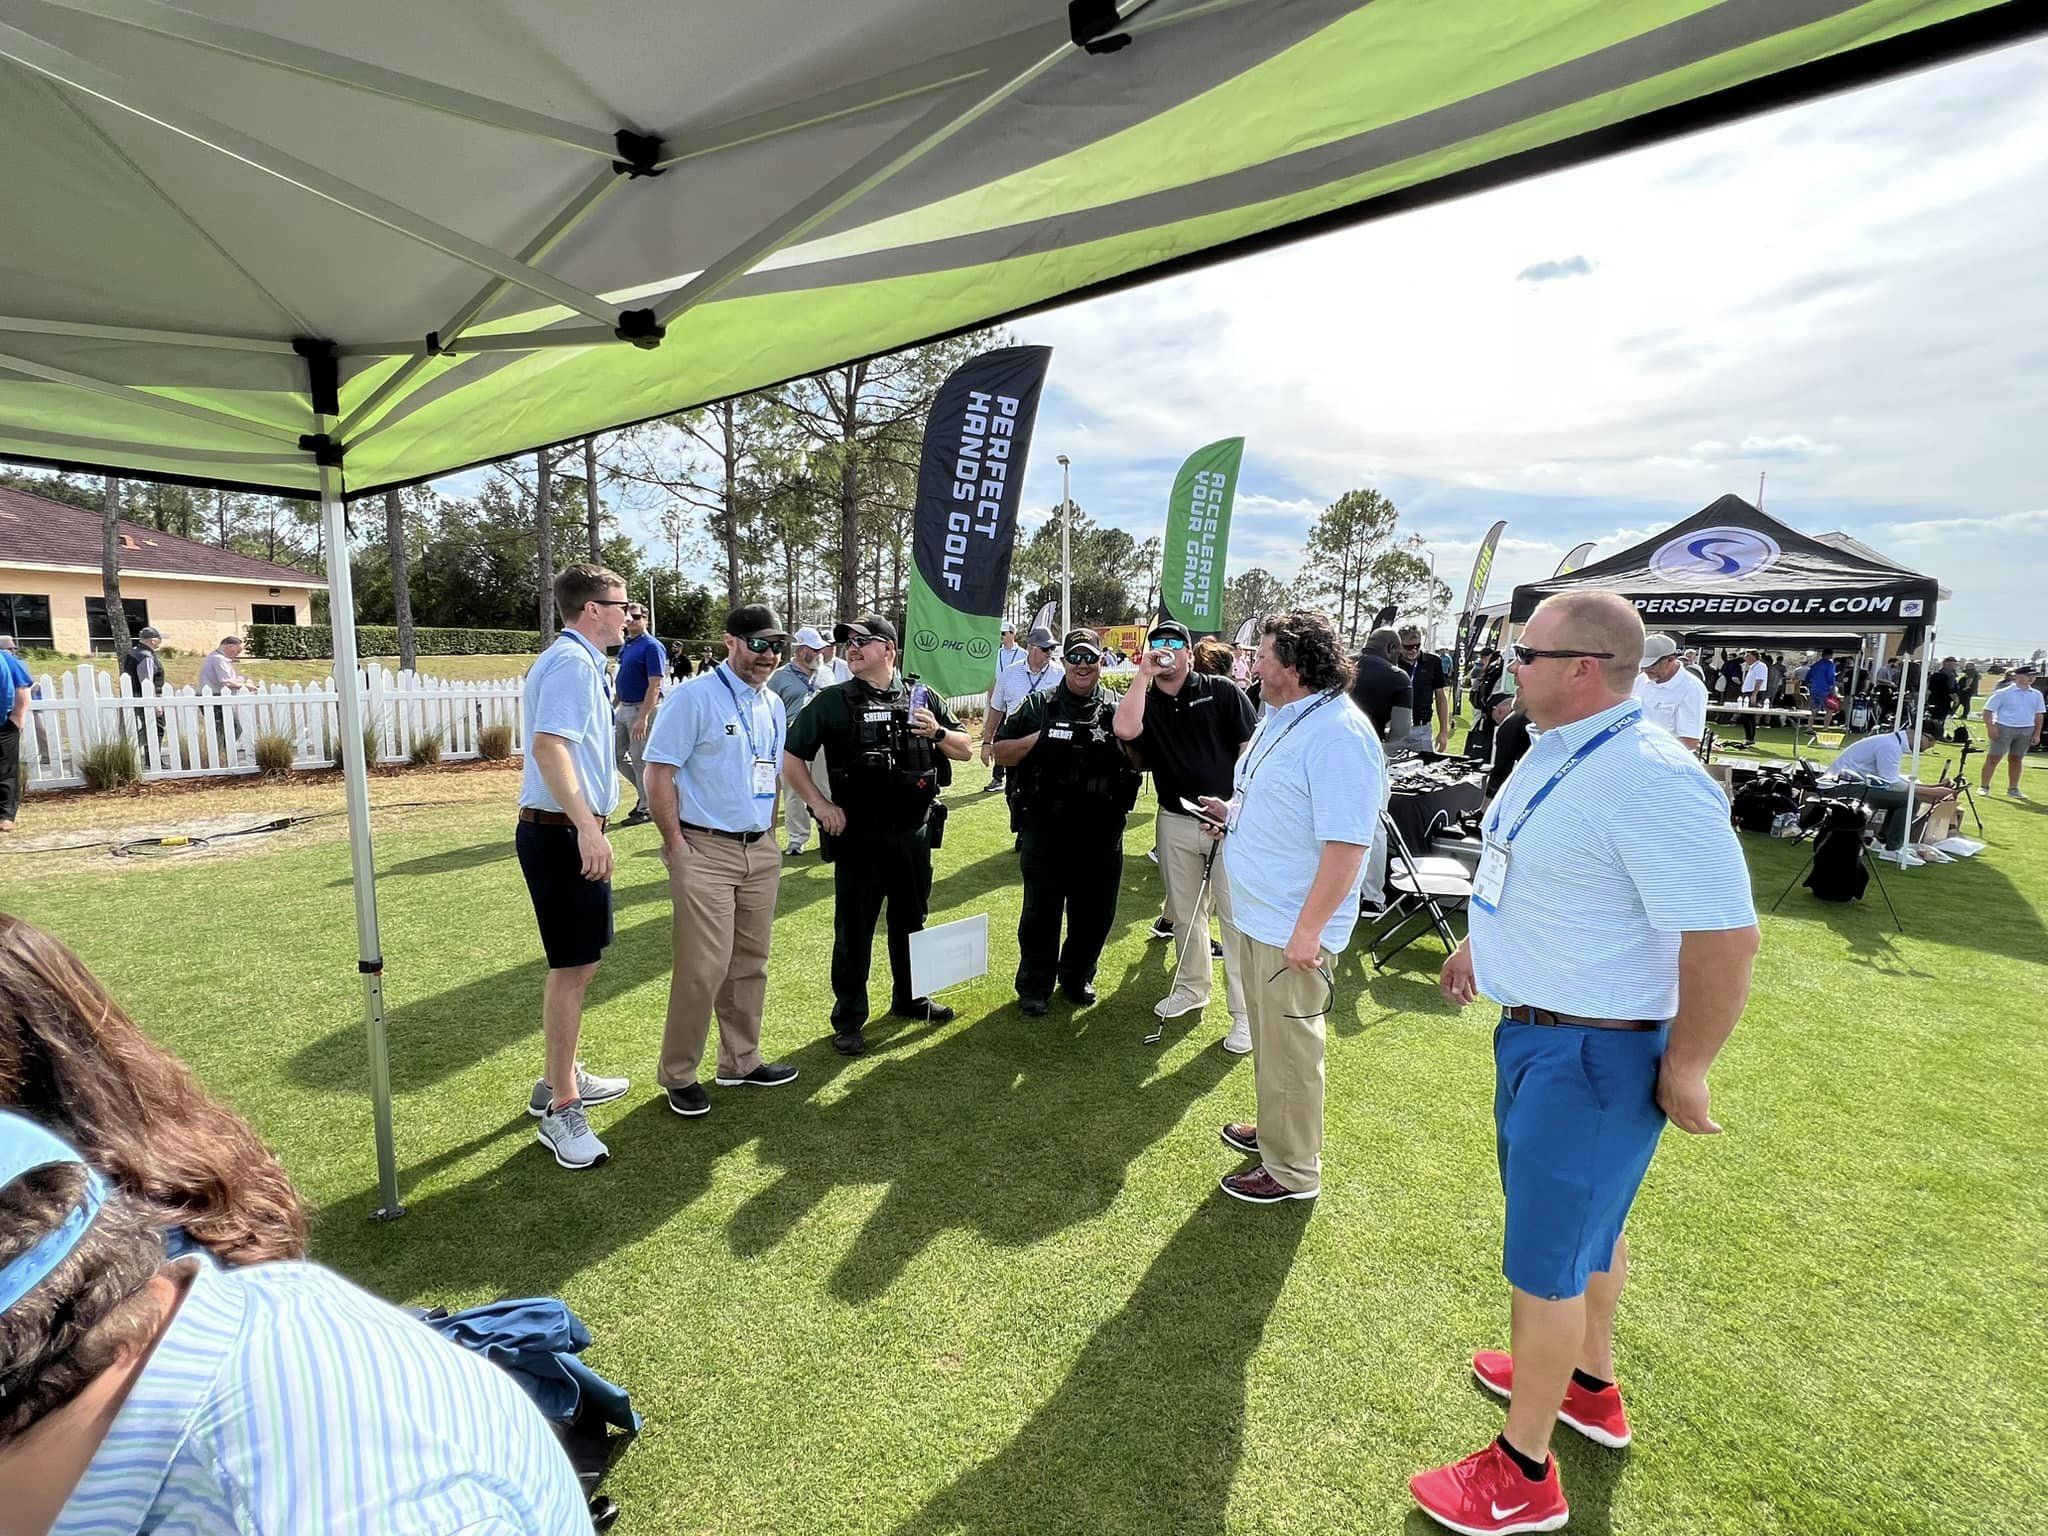 People conversing at an outdoor golf event with on an artificial turf installed by Turf and Sims.